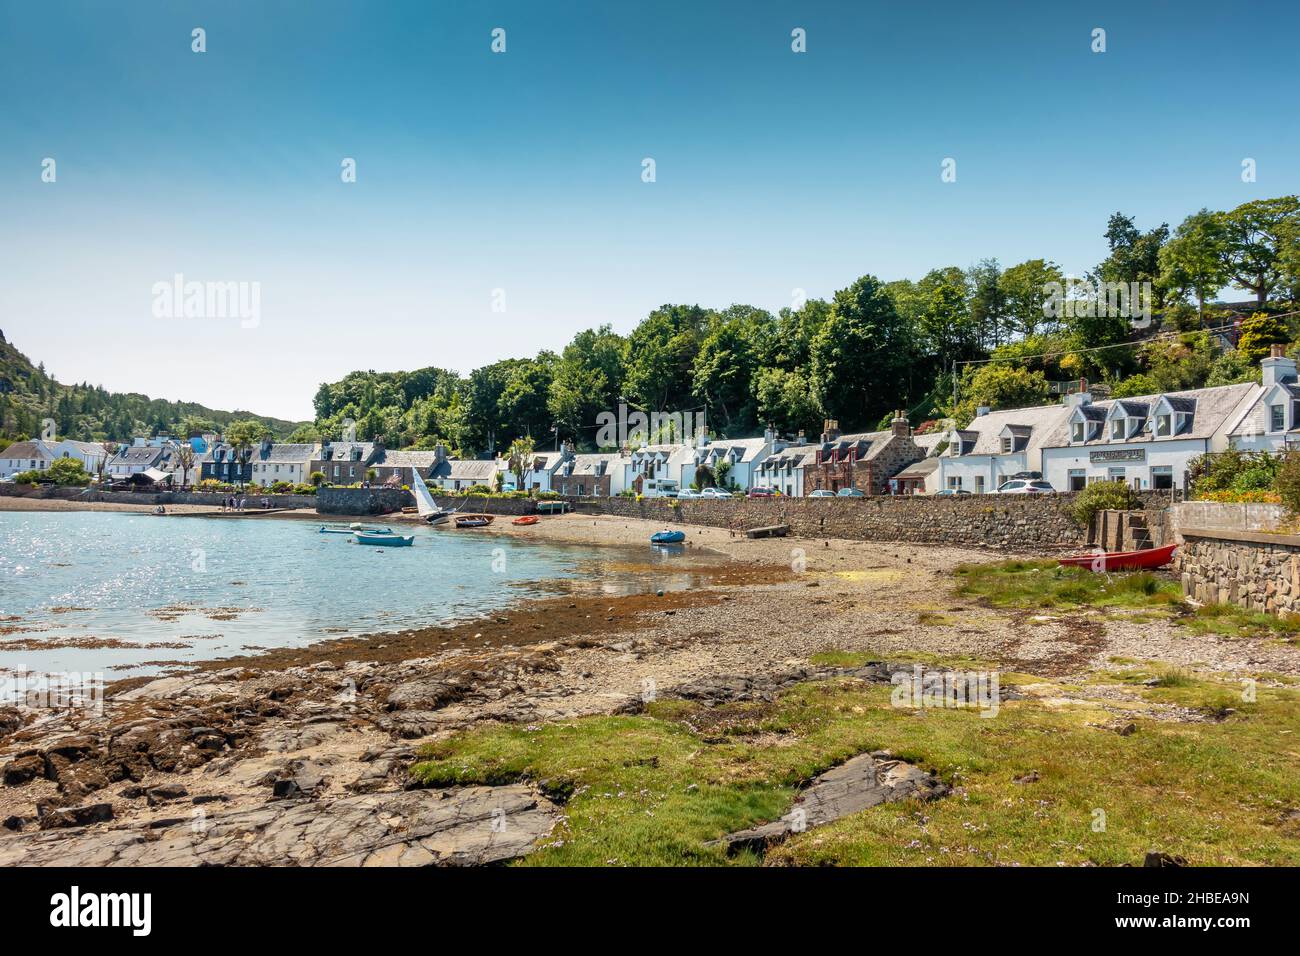 The beautiful village of Plockton, known as the Jewel of the Highlands, which overlooks Loch Carron in Scotland Stock Photo